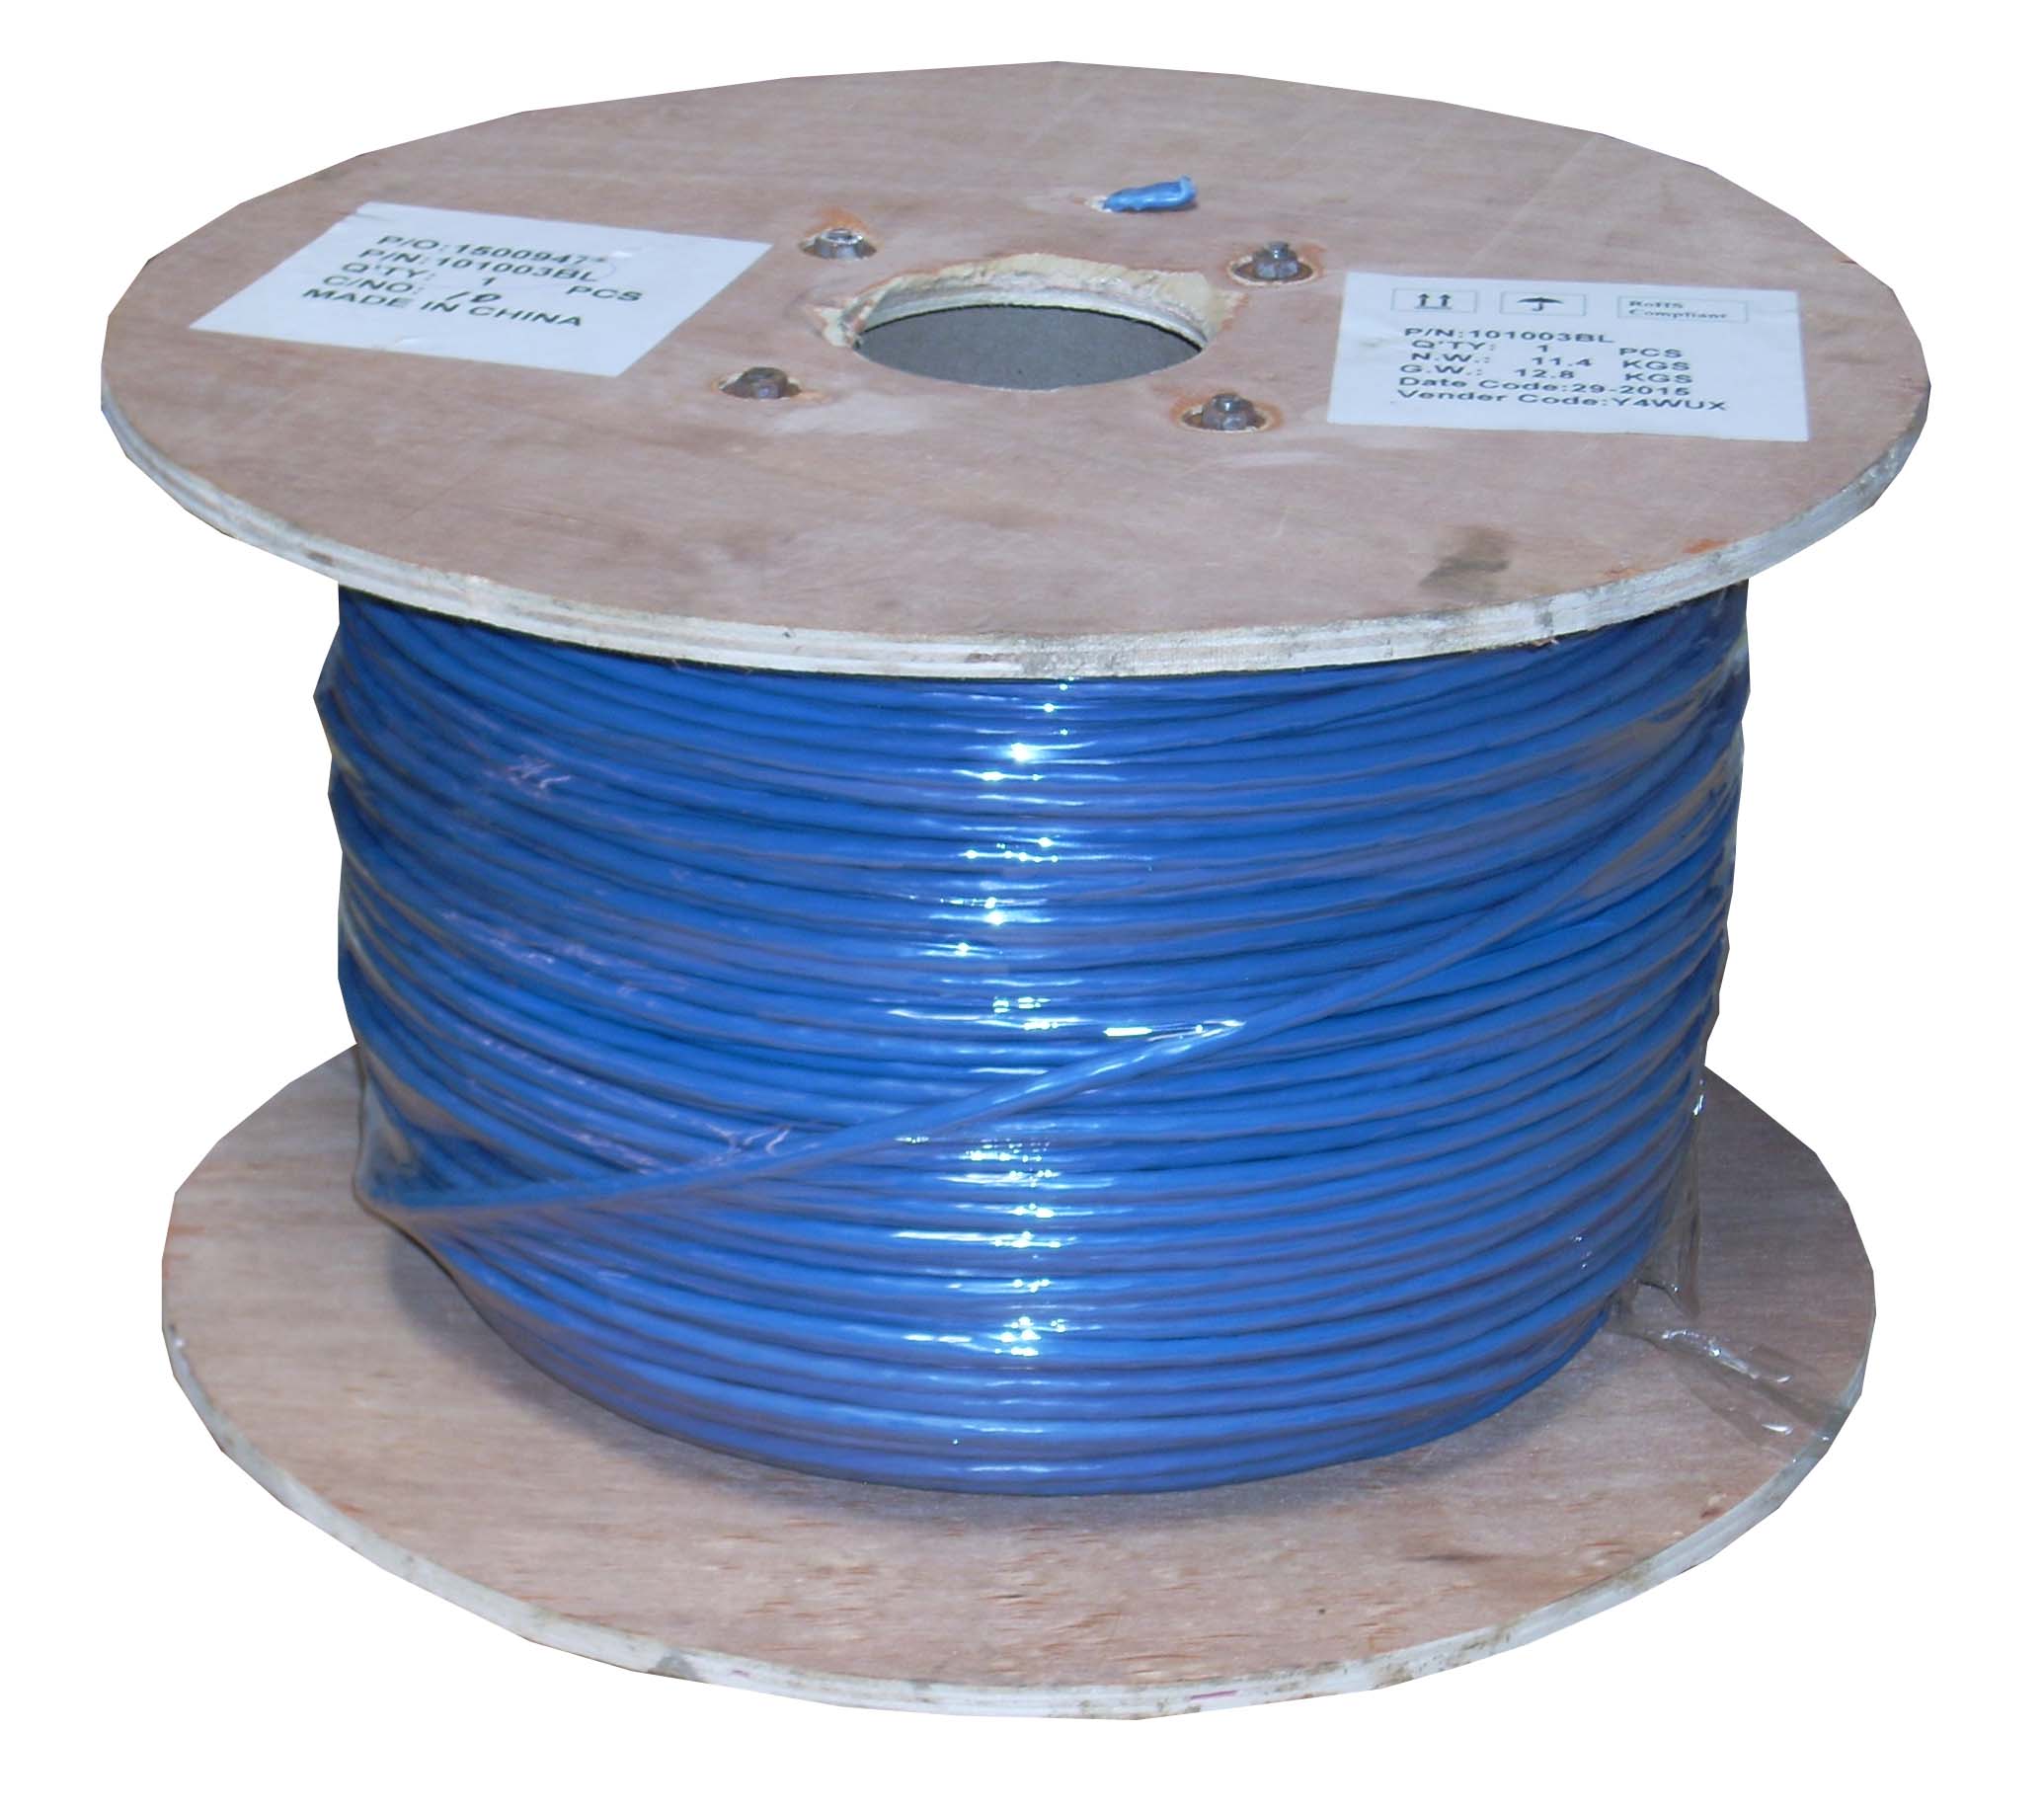 Shielded cable. Кабель витая пара STP состав. Strand Cable. Stranded Cable. 7pr28 Shielded Cable.